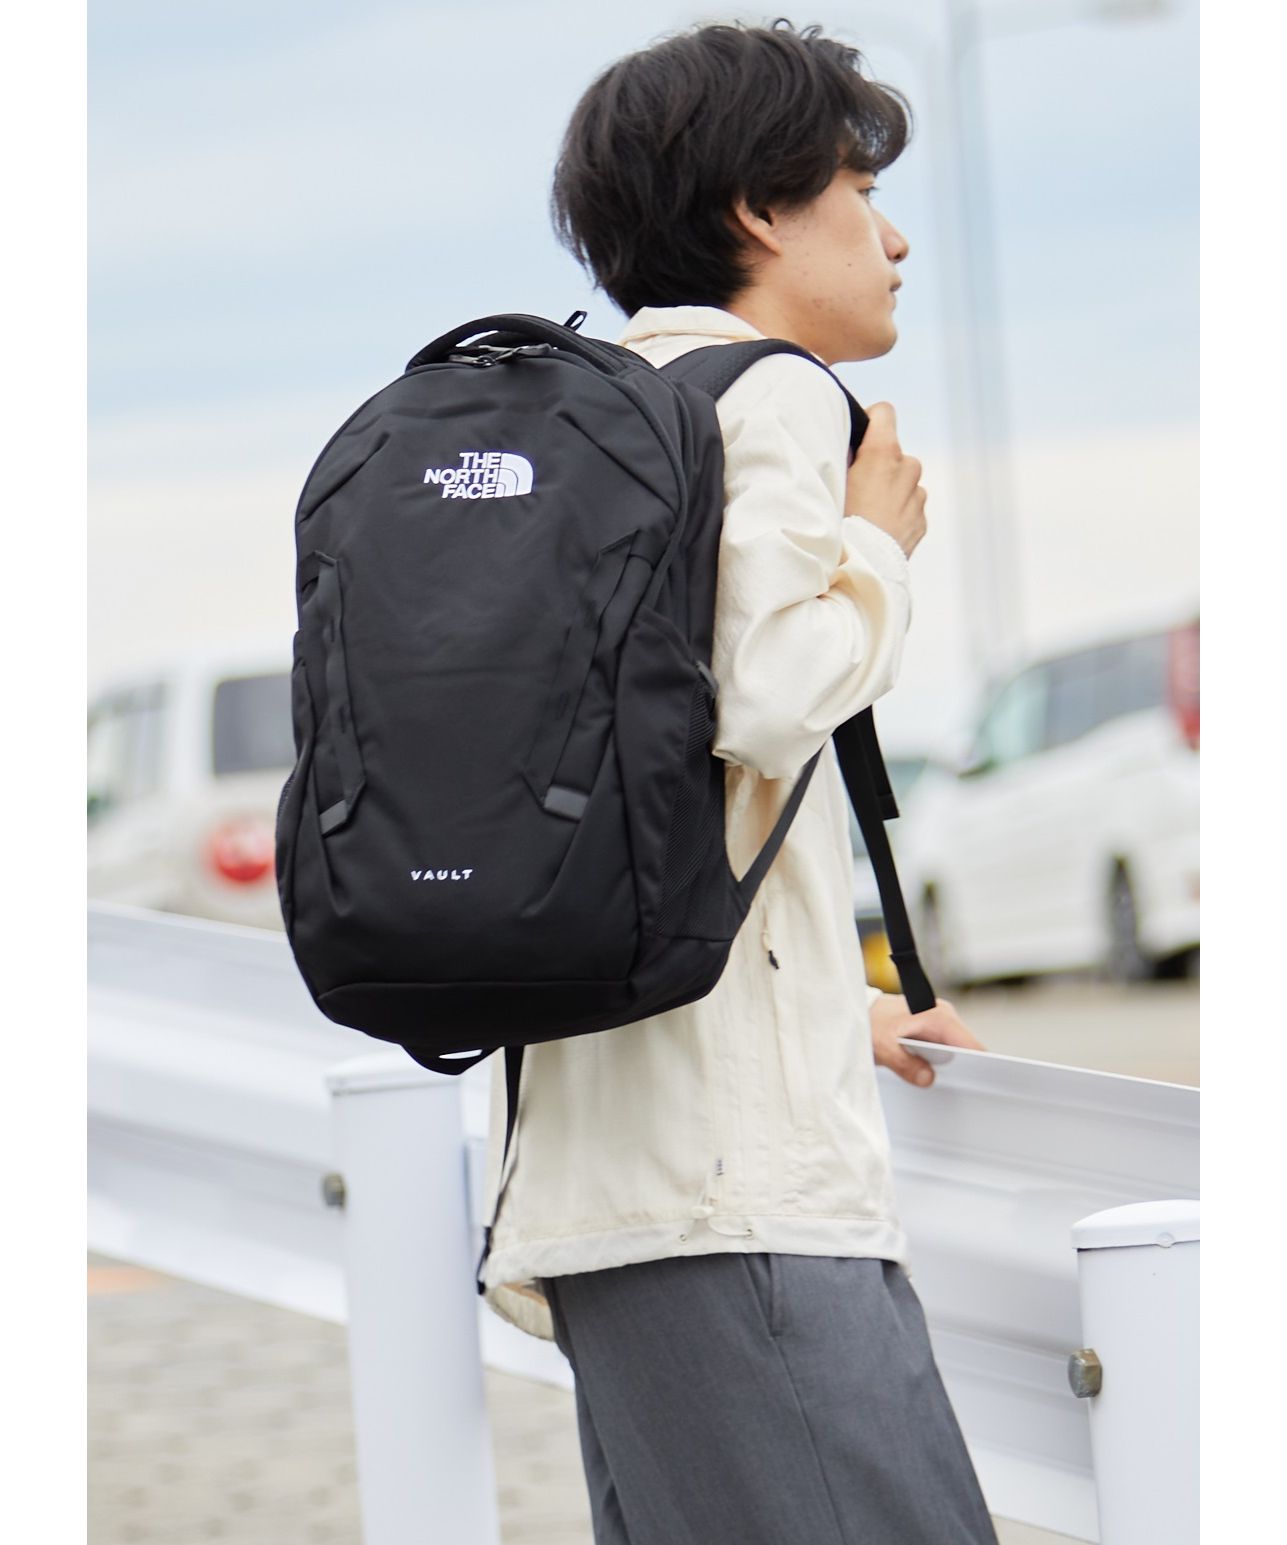 THE NORTH FACE ザノースフェイス / Vault BACKPACK